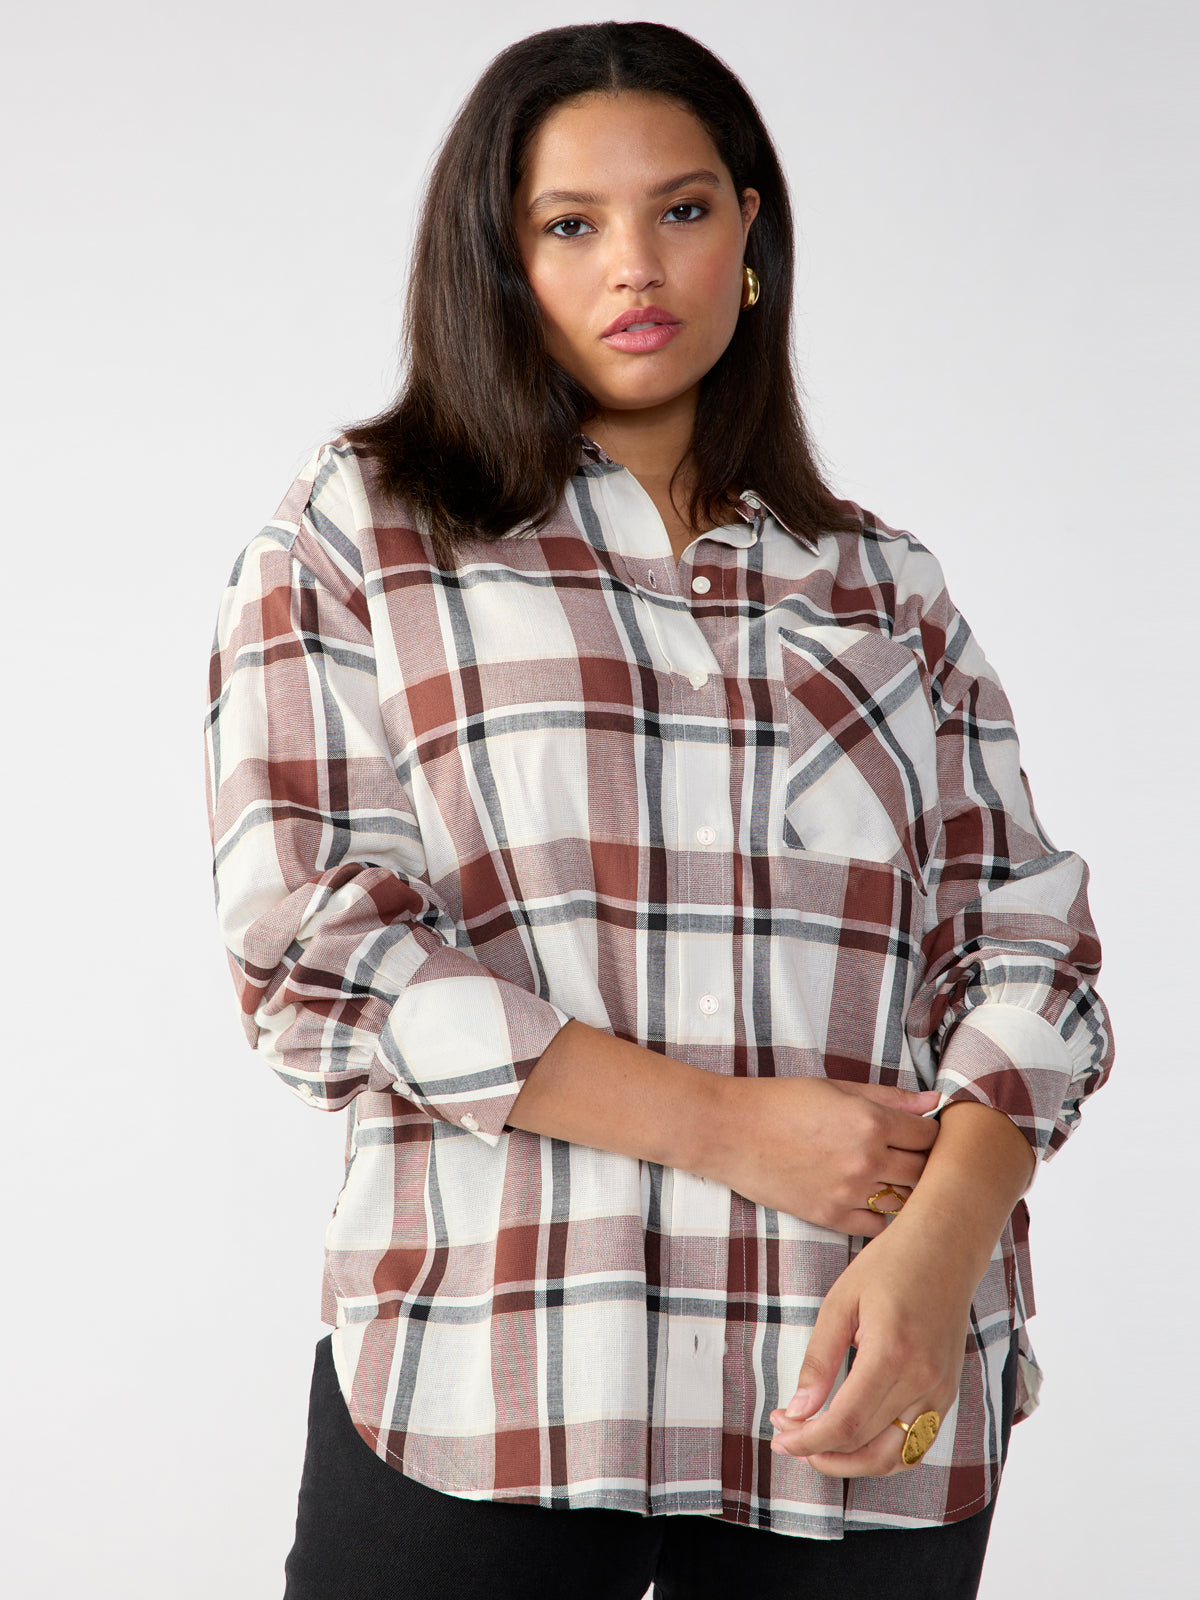 Dropped Shoulder Tunic Top Caramel Cafe Plaid Inclusive Collection